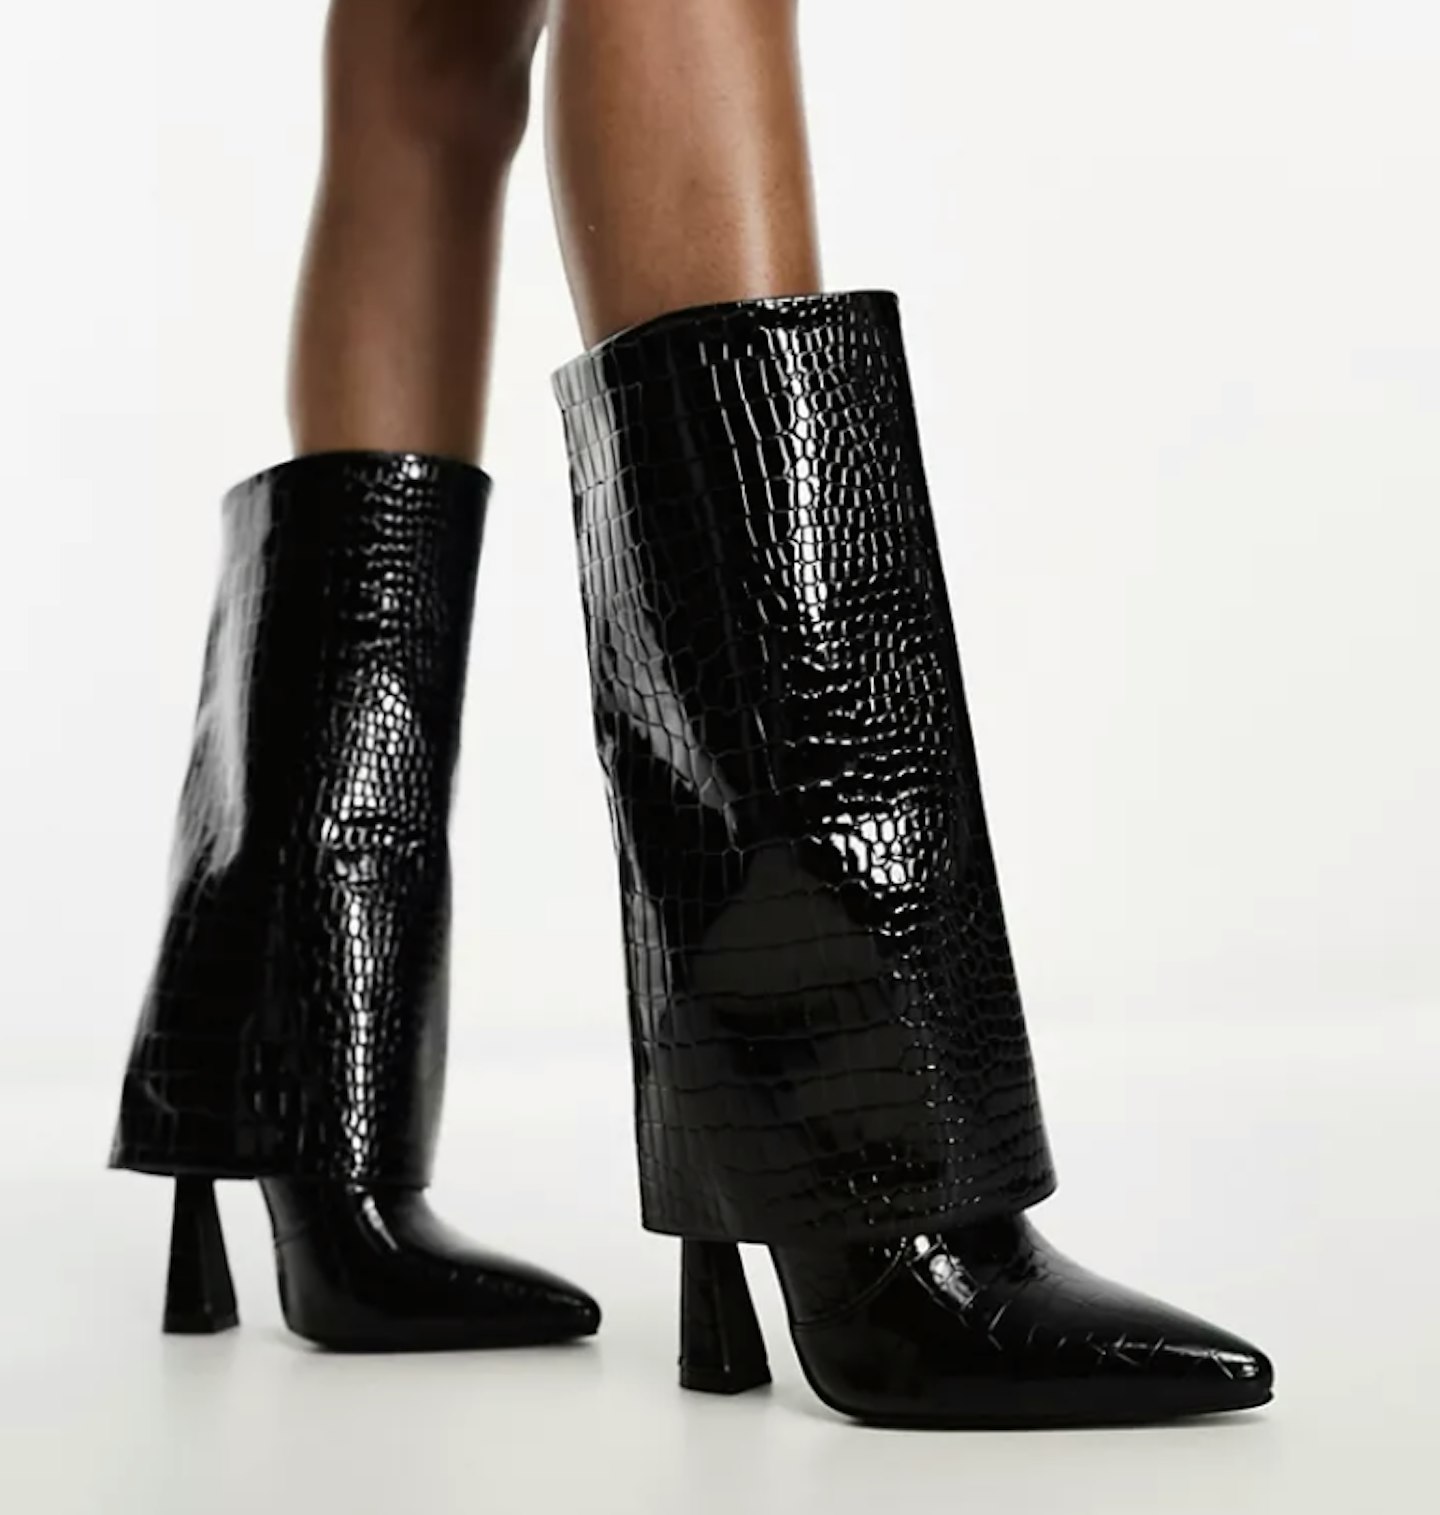 Simmi London Rayan fold over heeled knee boots in black patent croc